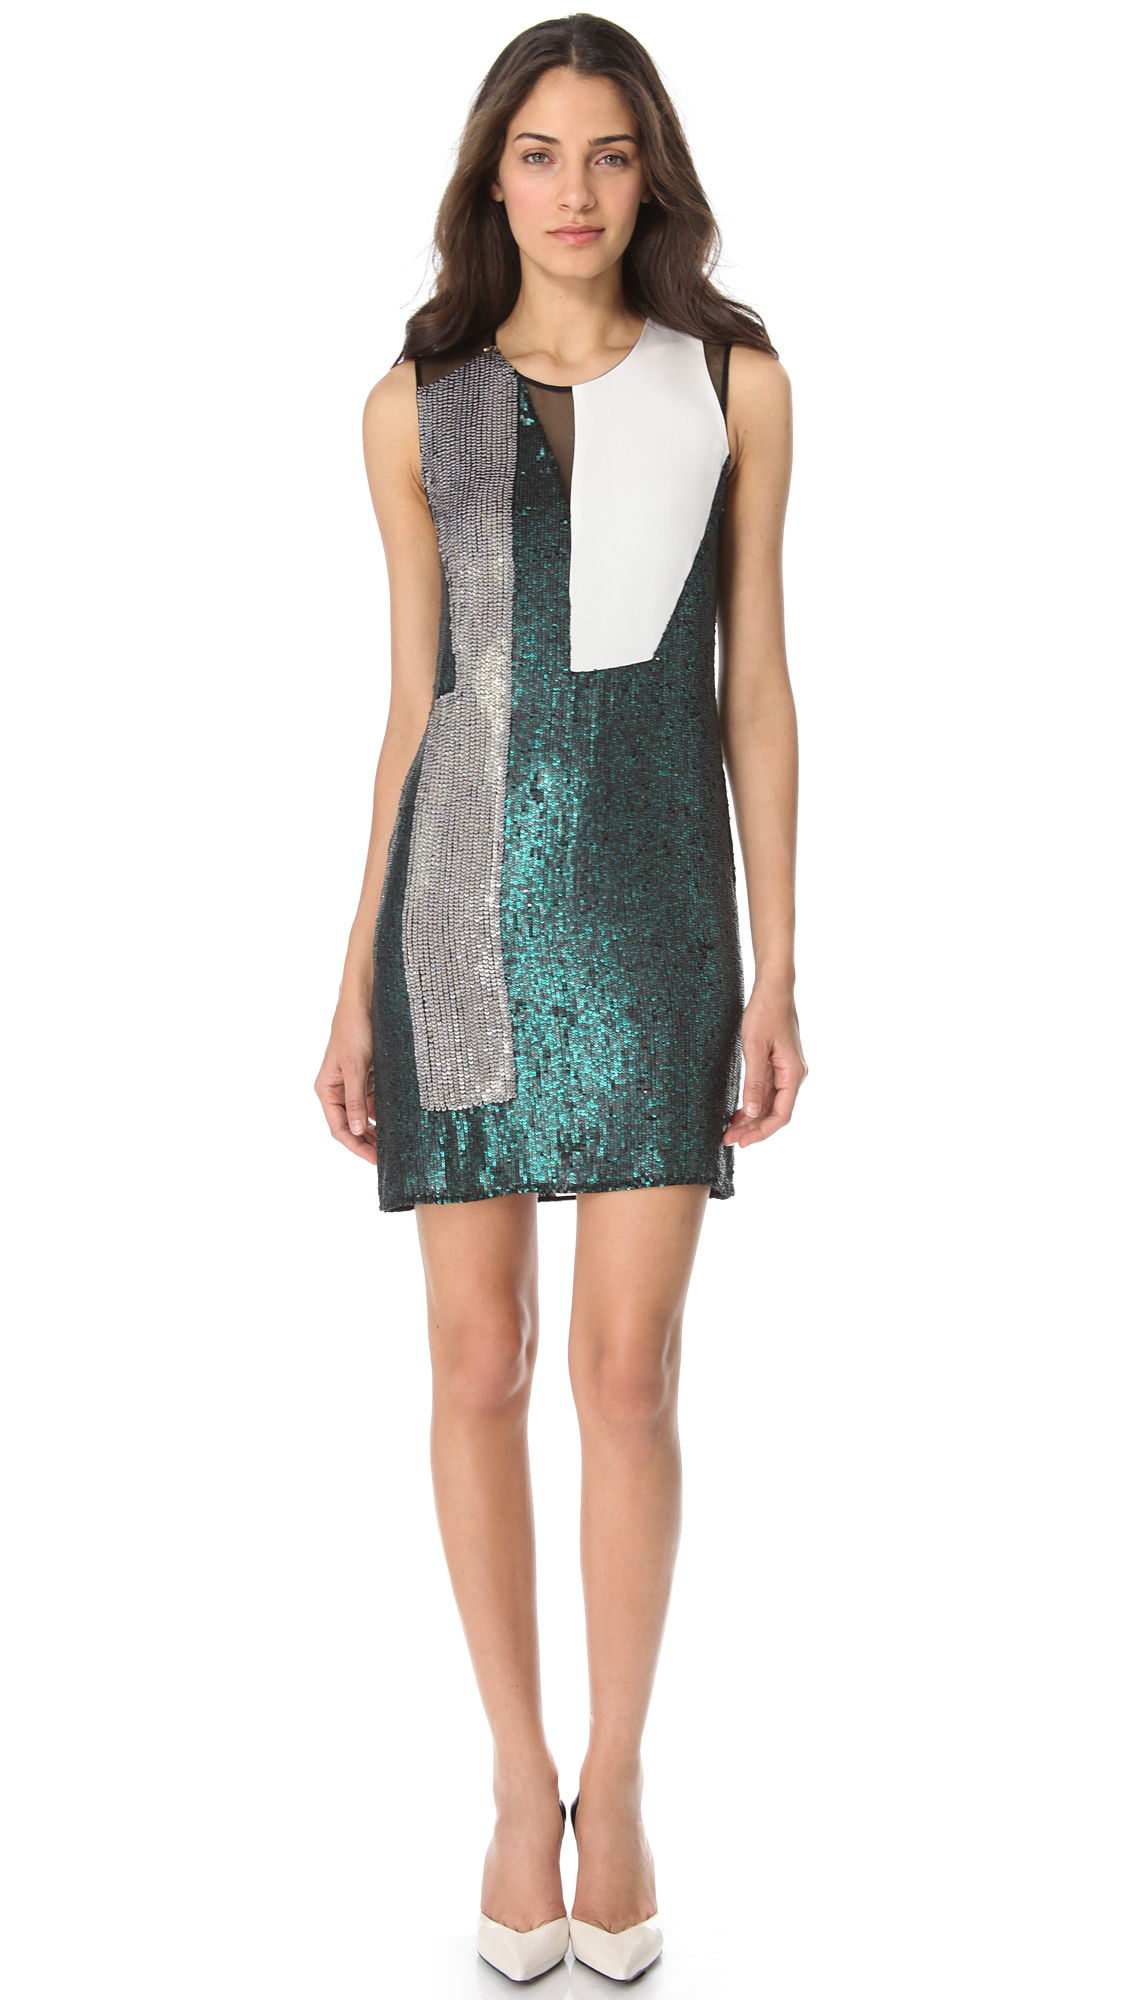 Lyst - 3.1 Phillip Lim Sequin Collage Dress in Green